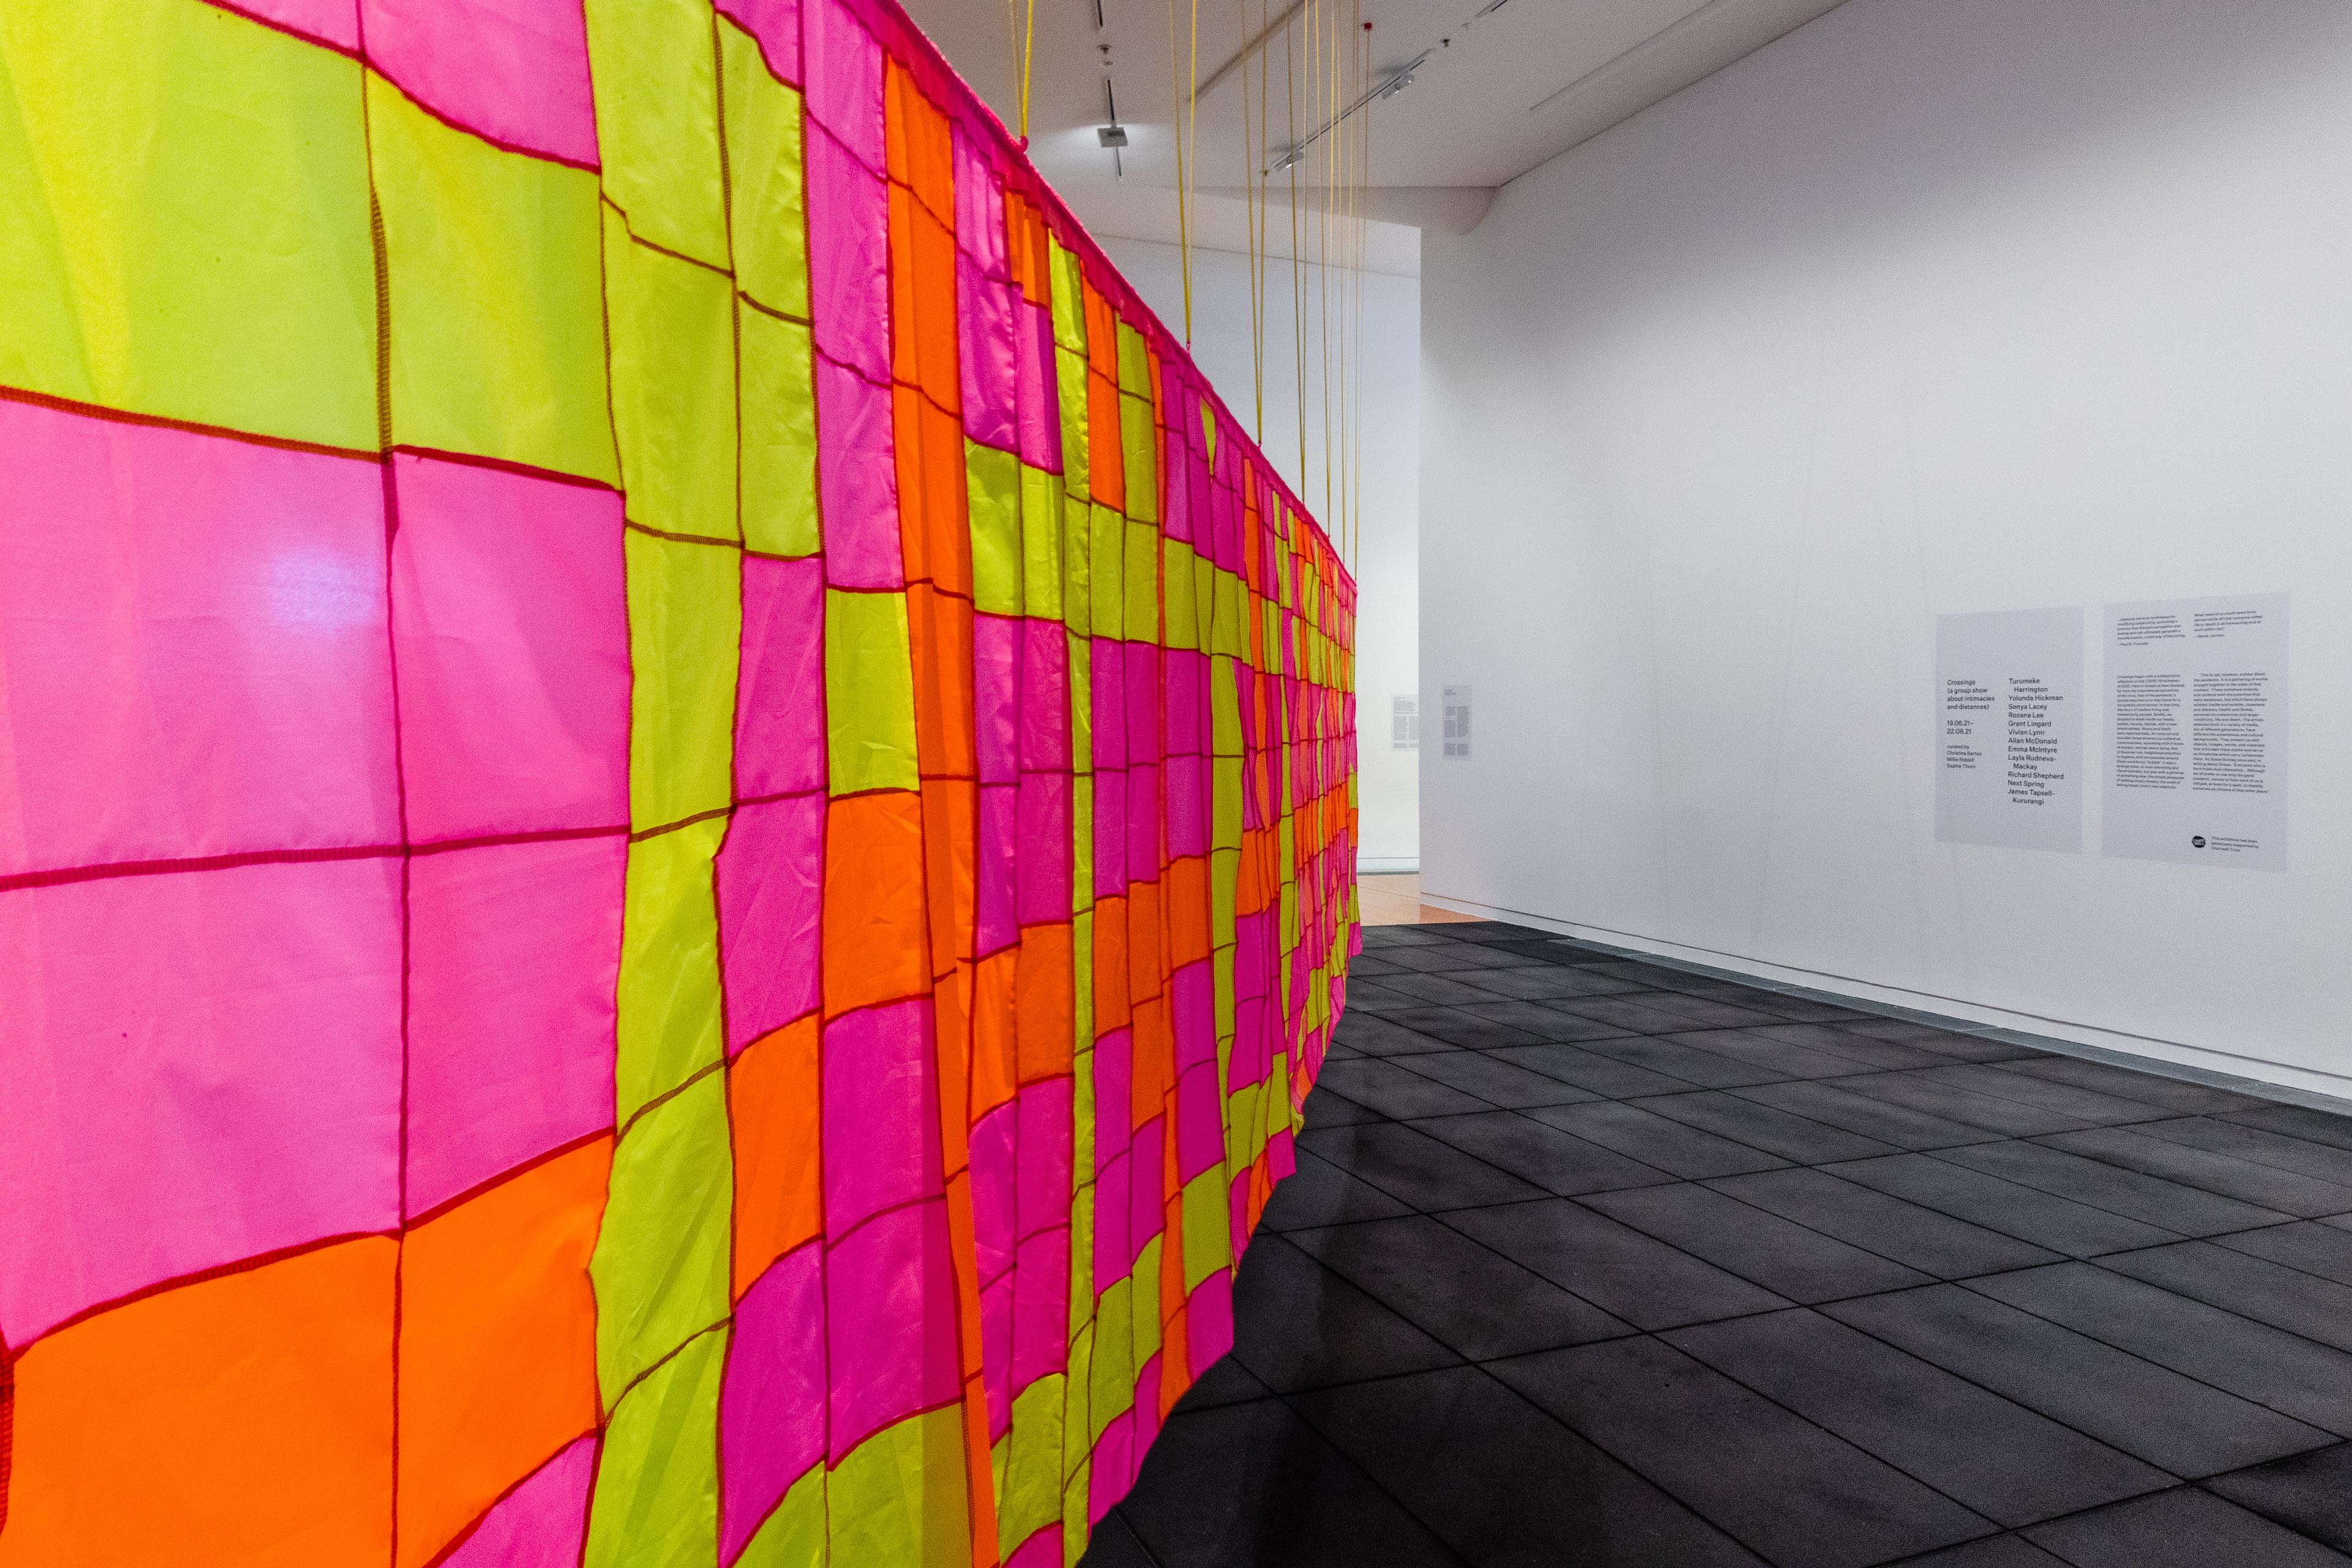 A large patchwork banner of fluoro yellow, pink and orange squares, hanging in a white walled, black floored gallery